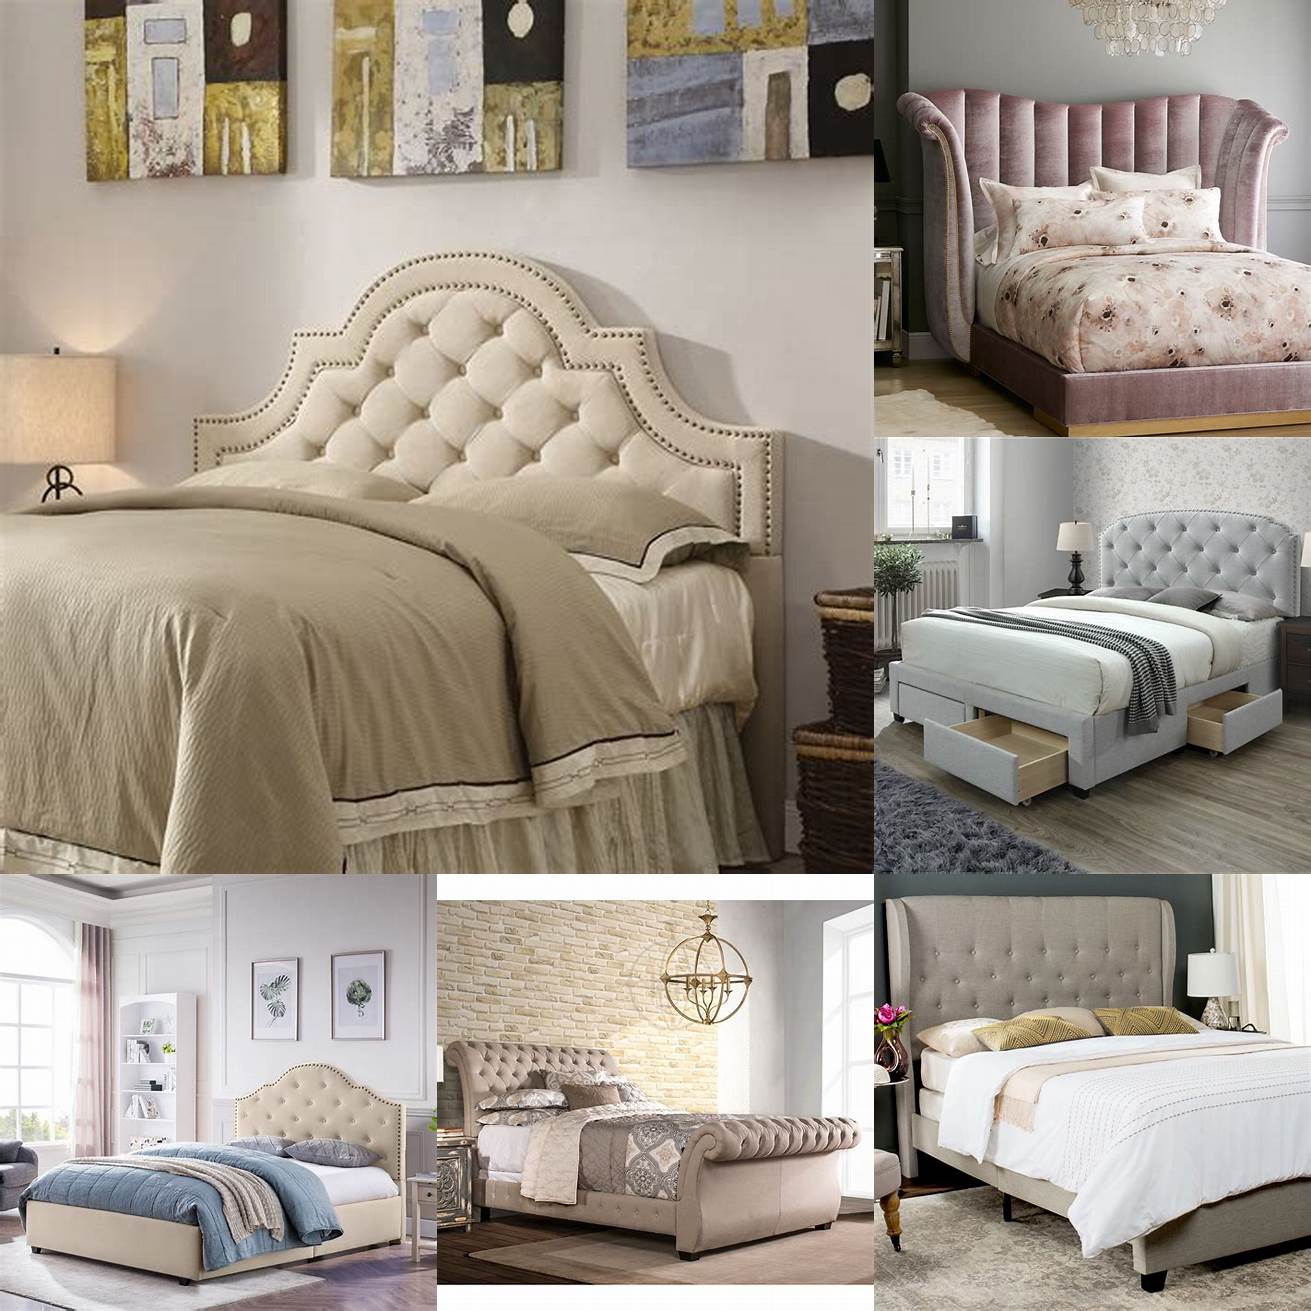 Price Tufted queen beds can be more expensive than other types of beds especially if they are made with high-end materials